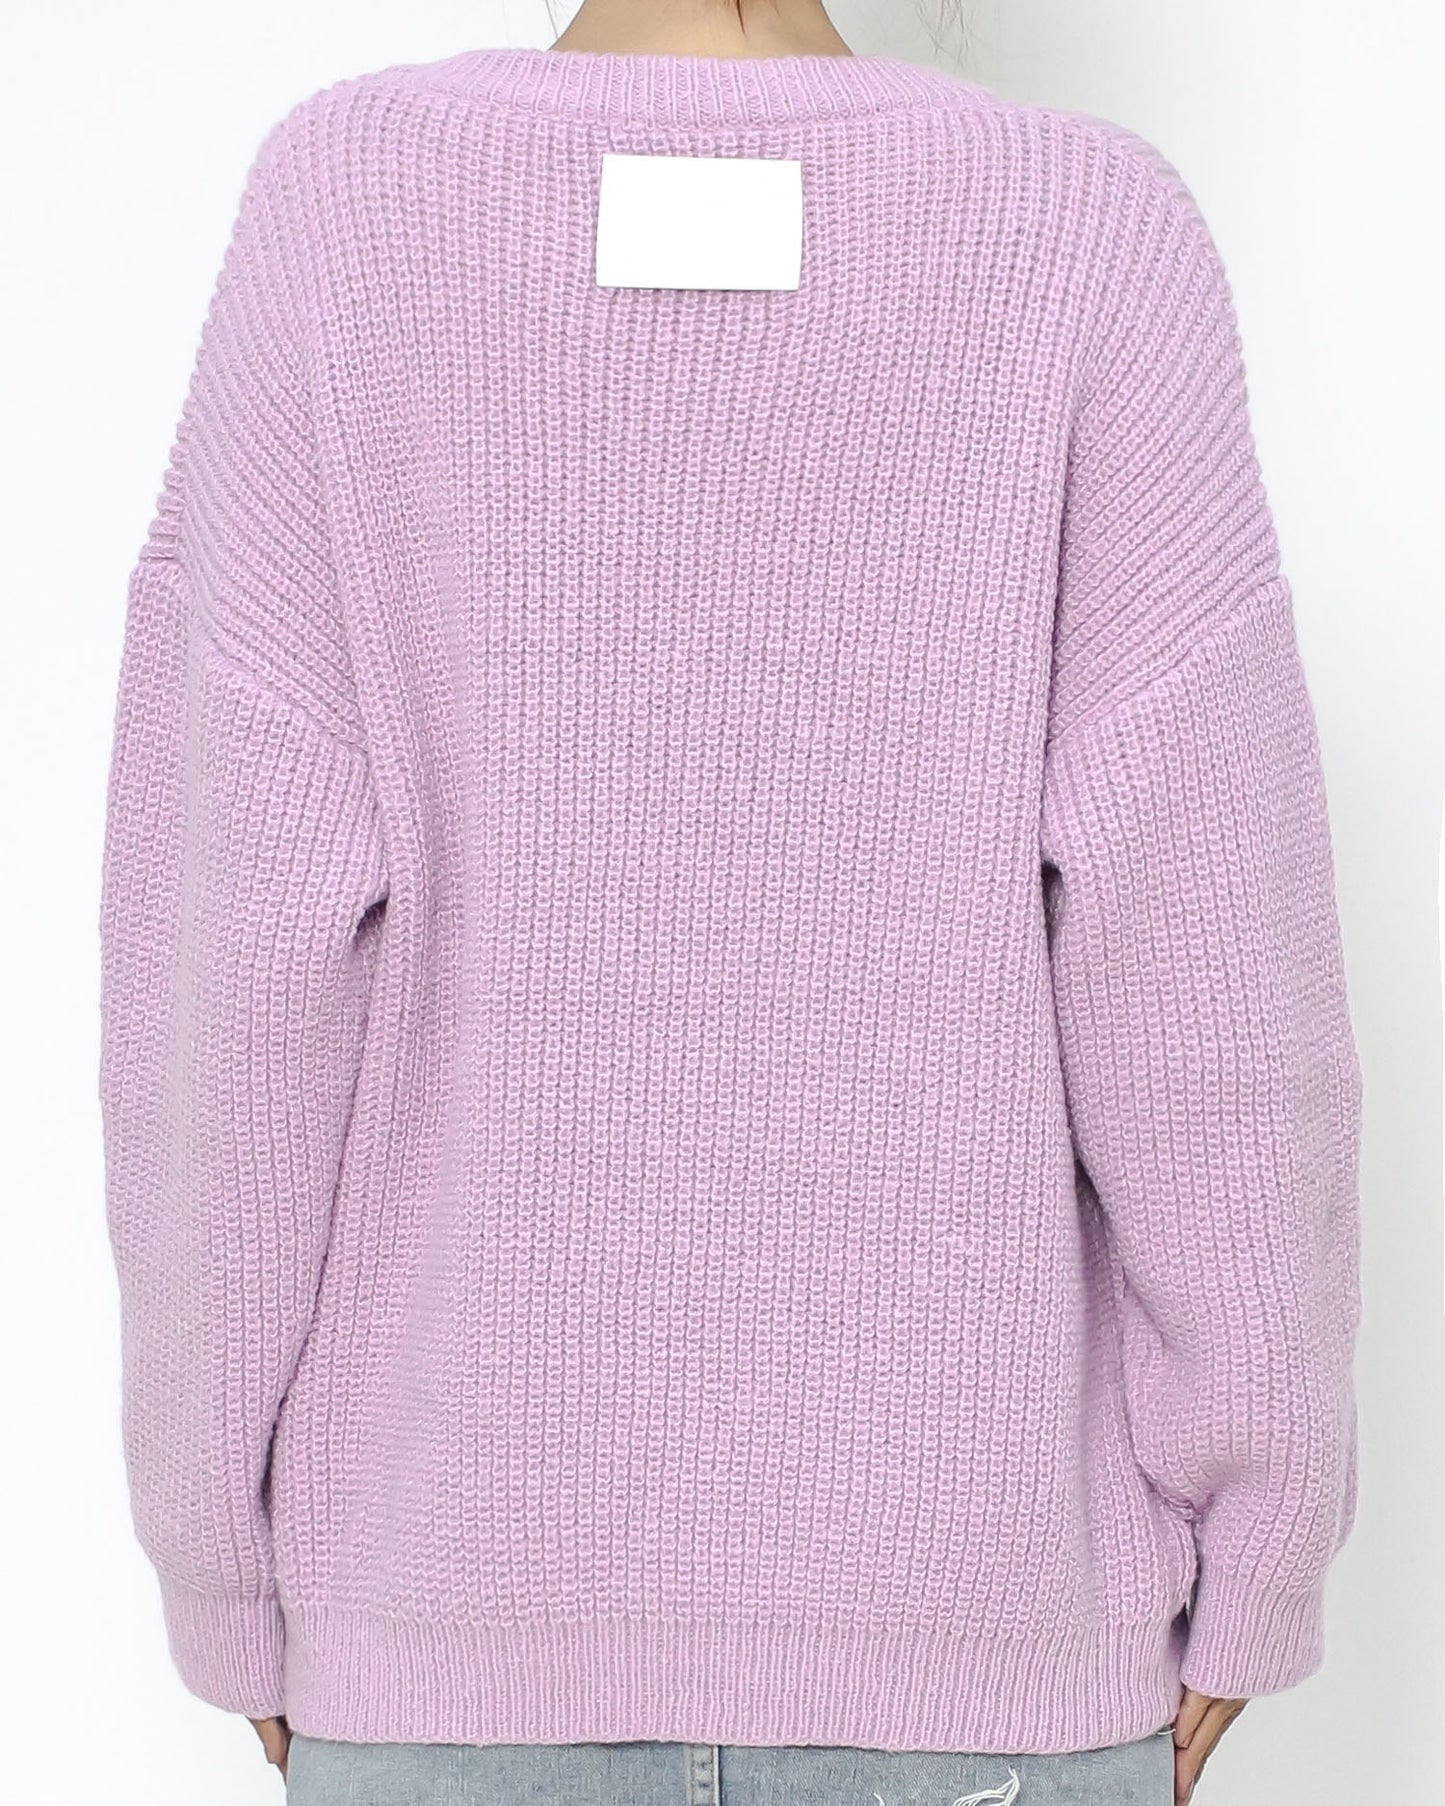 lilac heart knitted top *pre-order*